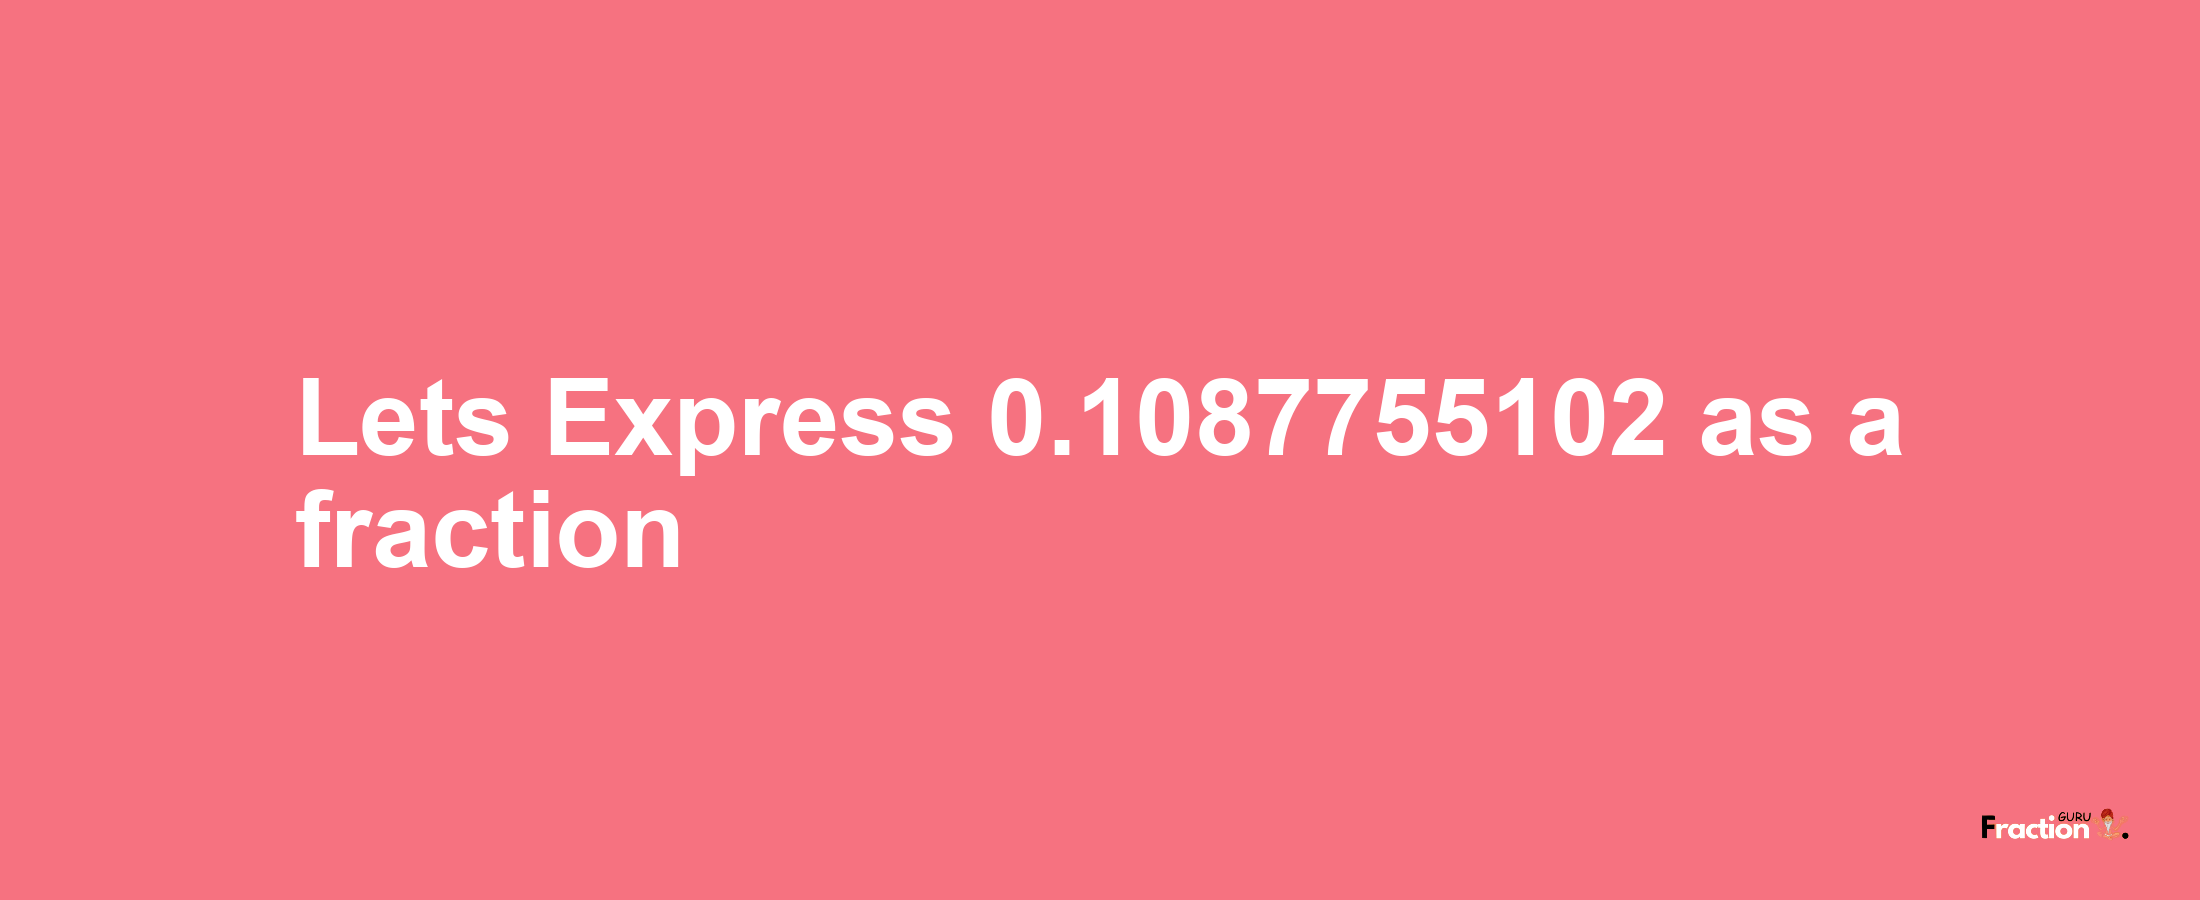 Lets Express 0.1087755102 as afraction